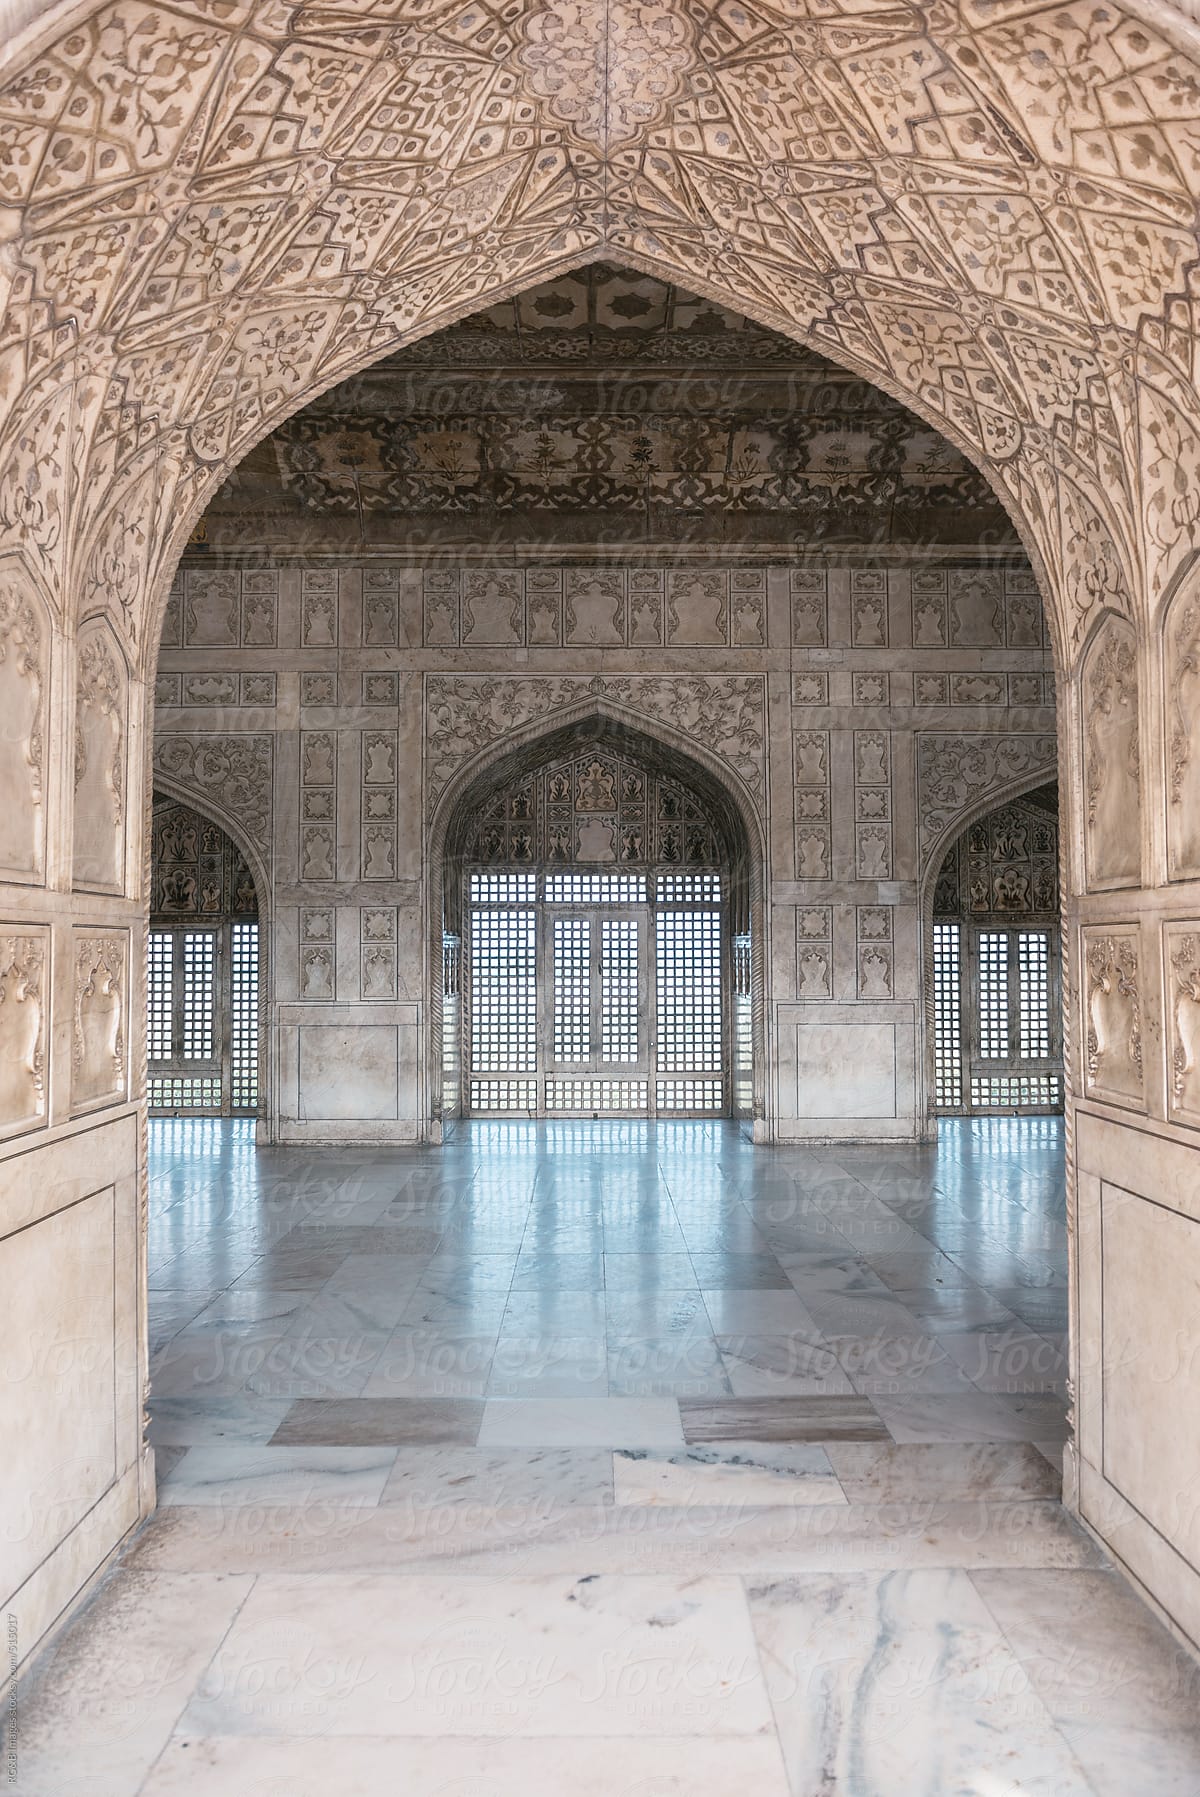 Architecture detail in Agra Fort